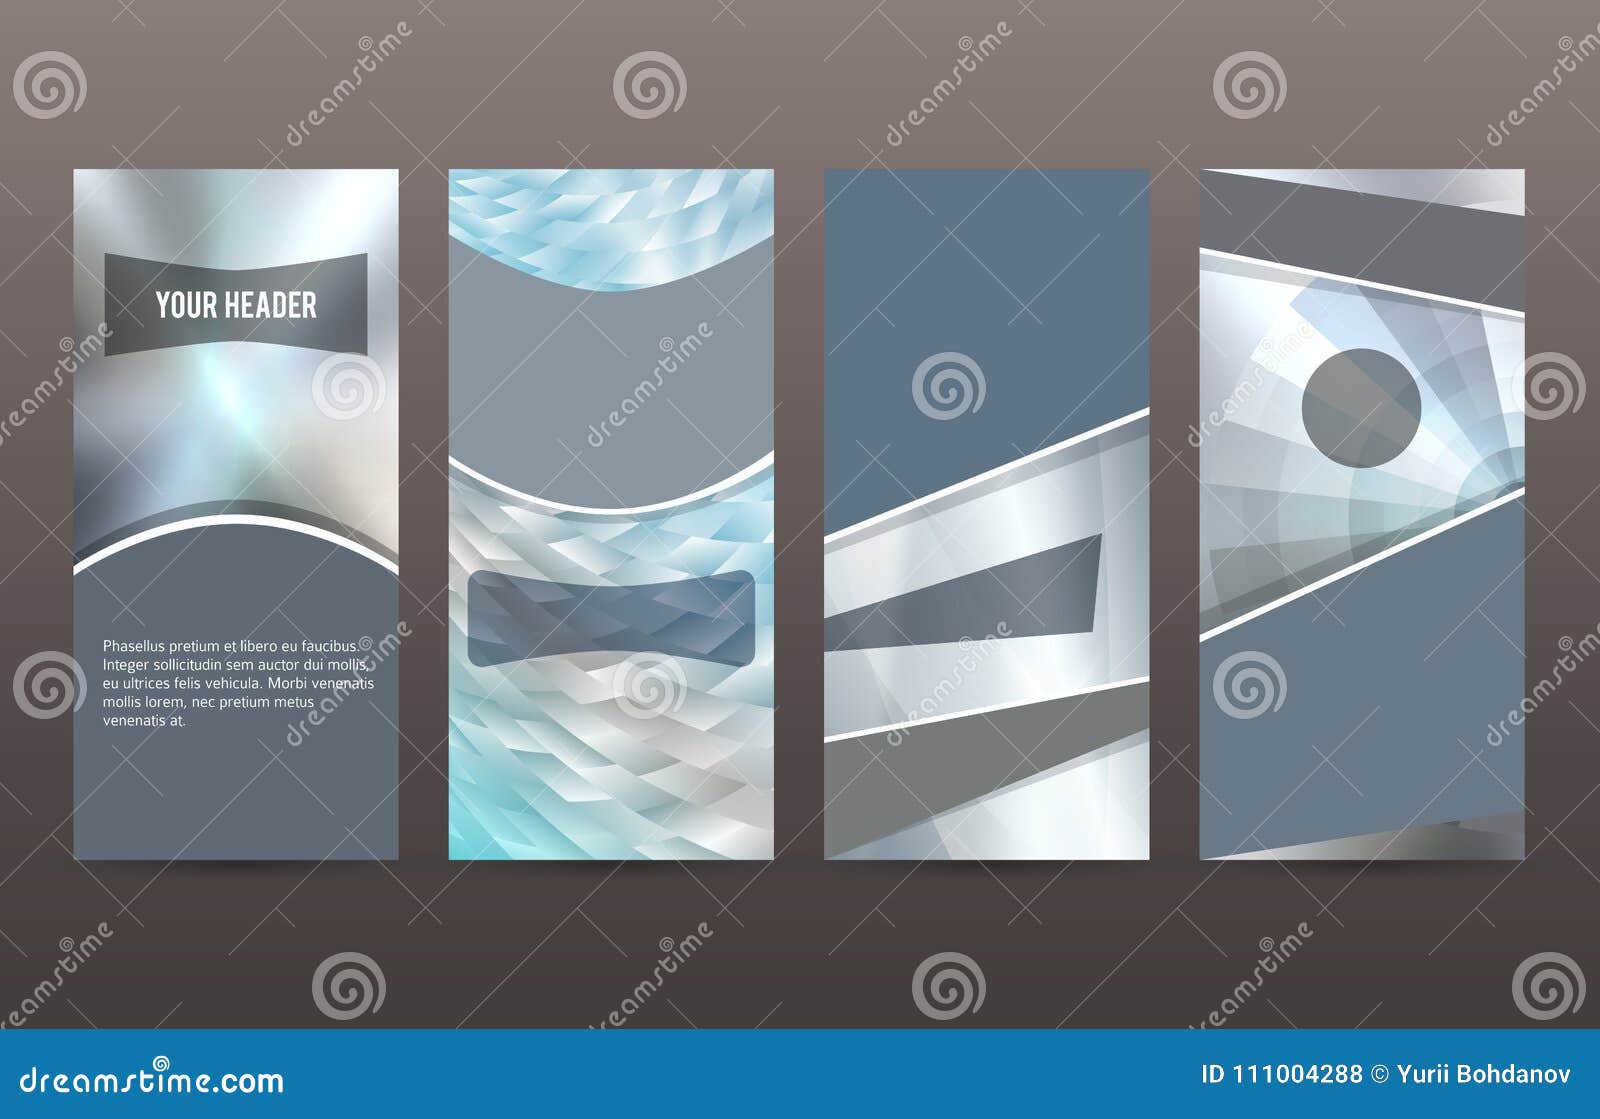 set cover pages brochure background metalic 09